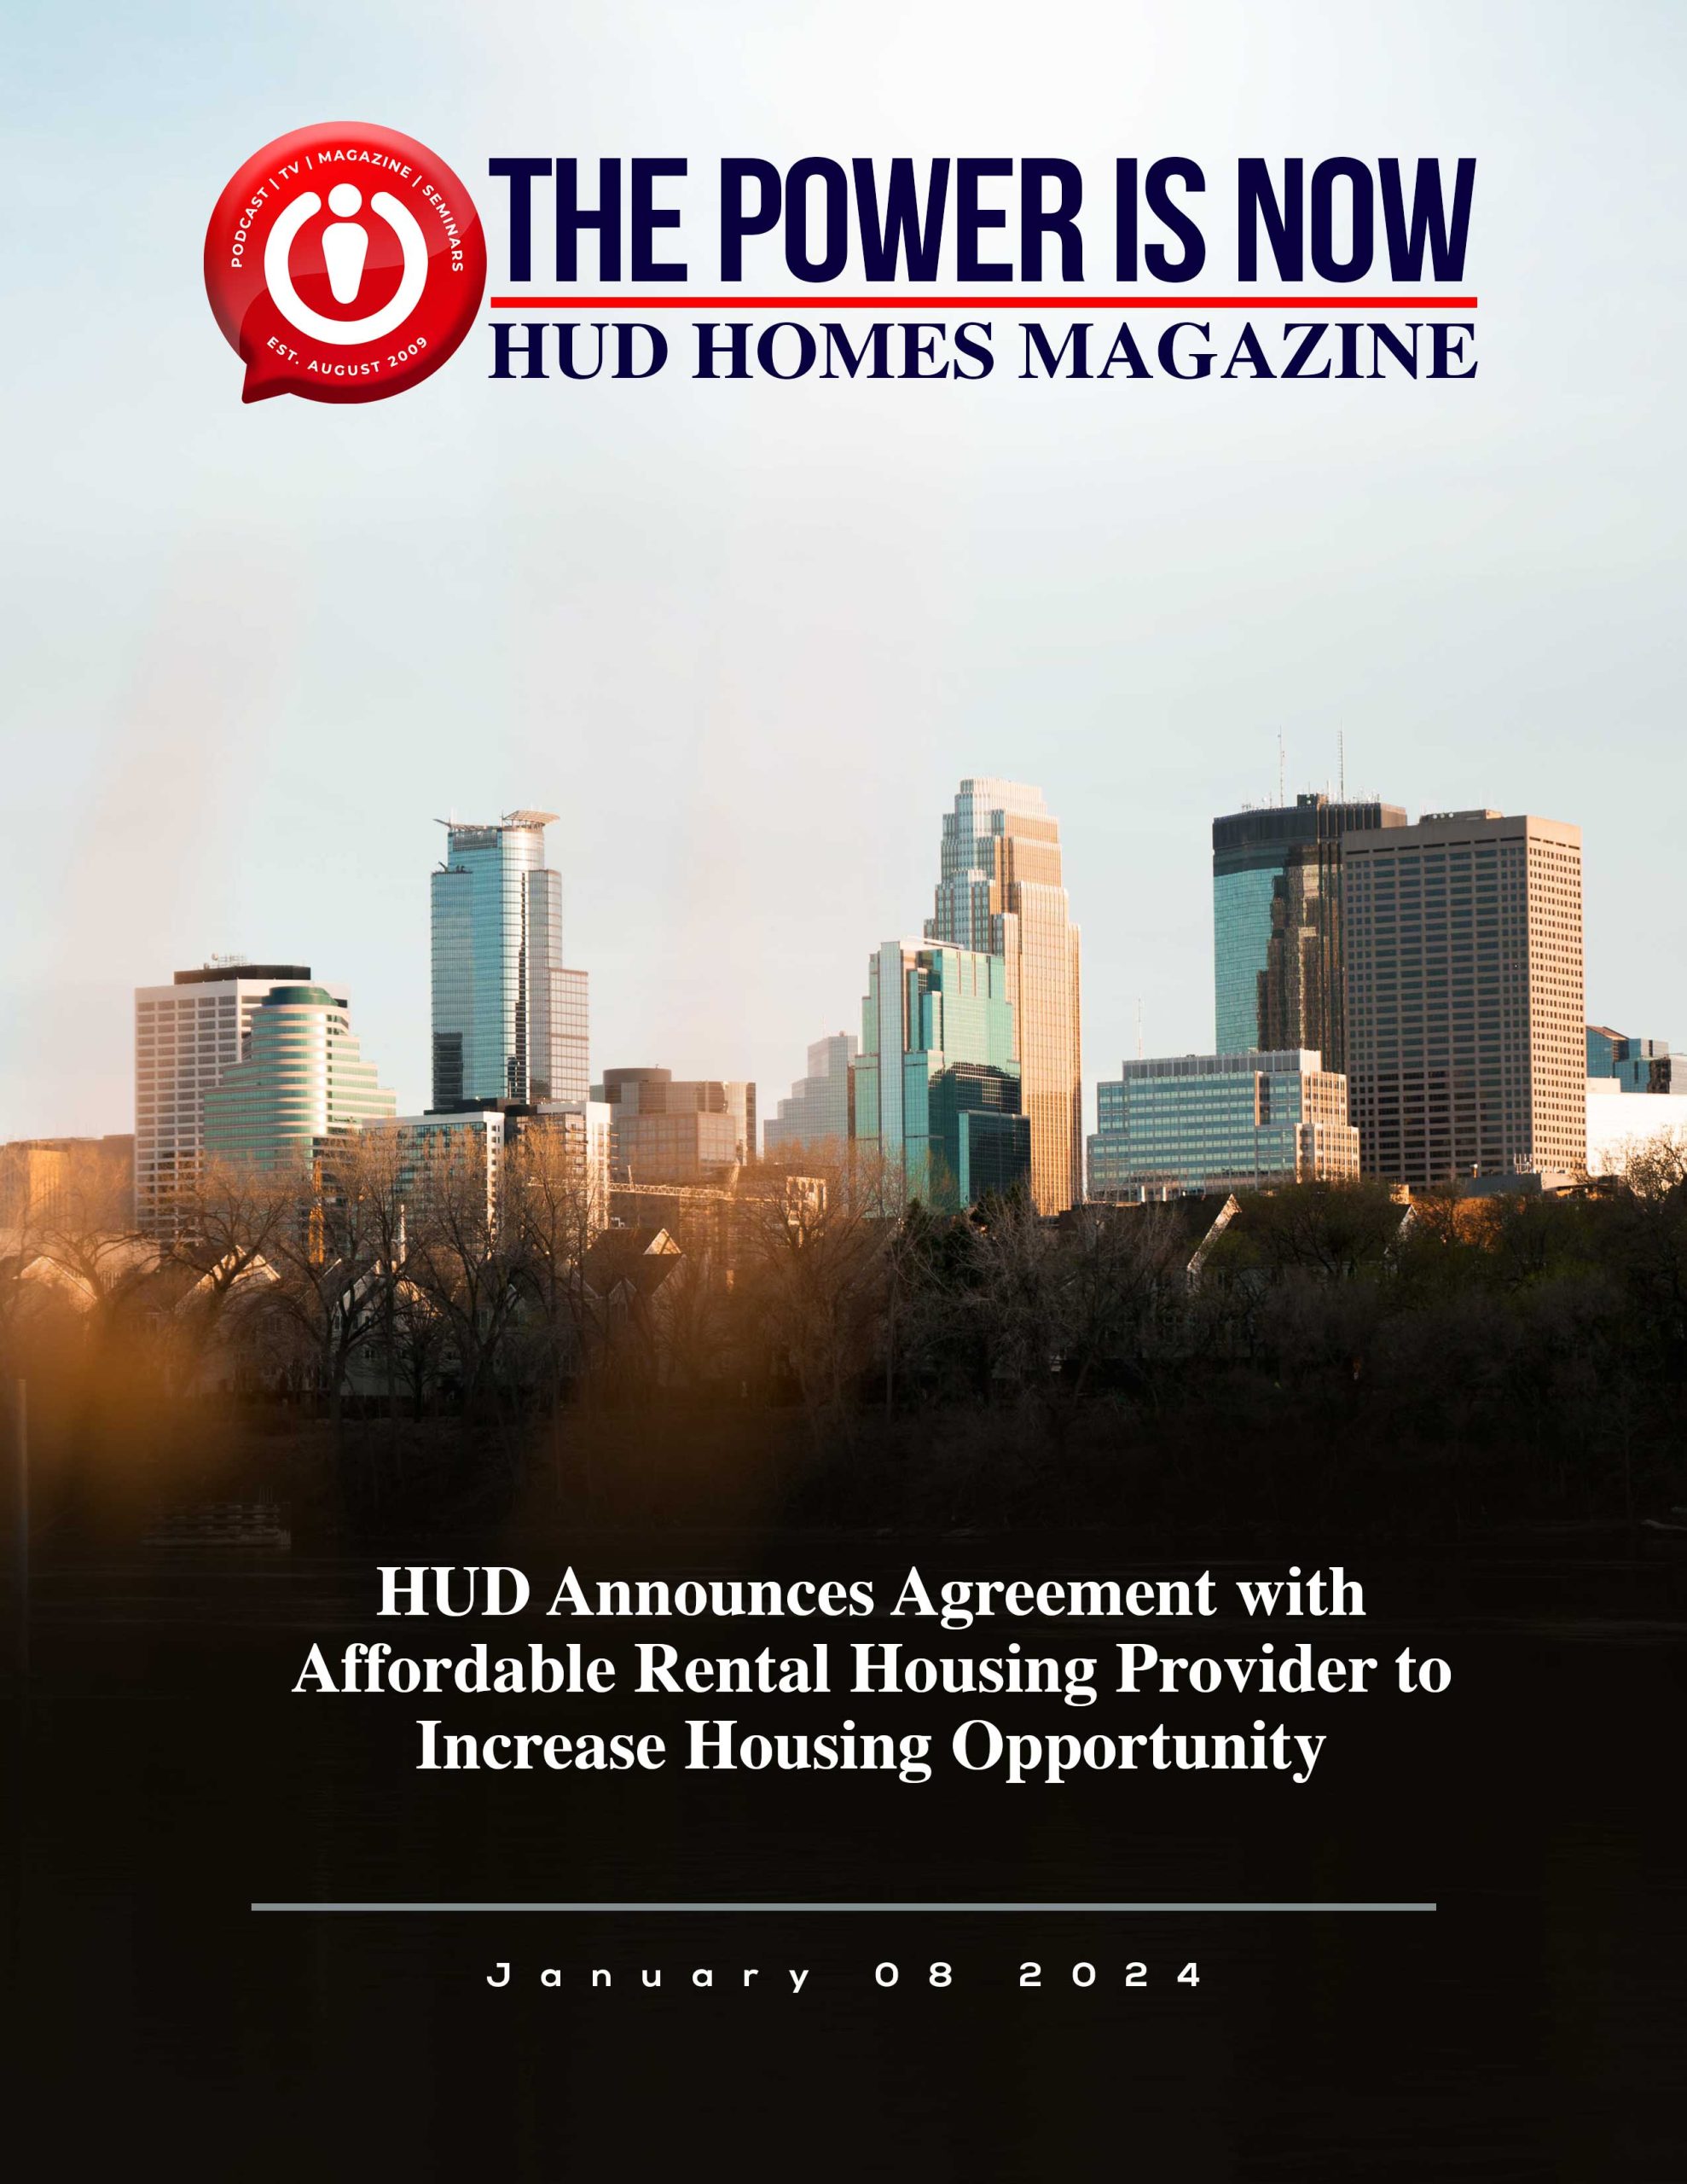 HUD Announces Agreement with Affordable Rental - The Power is now HUD Homes Magazine